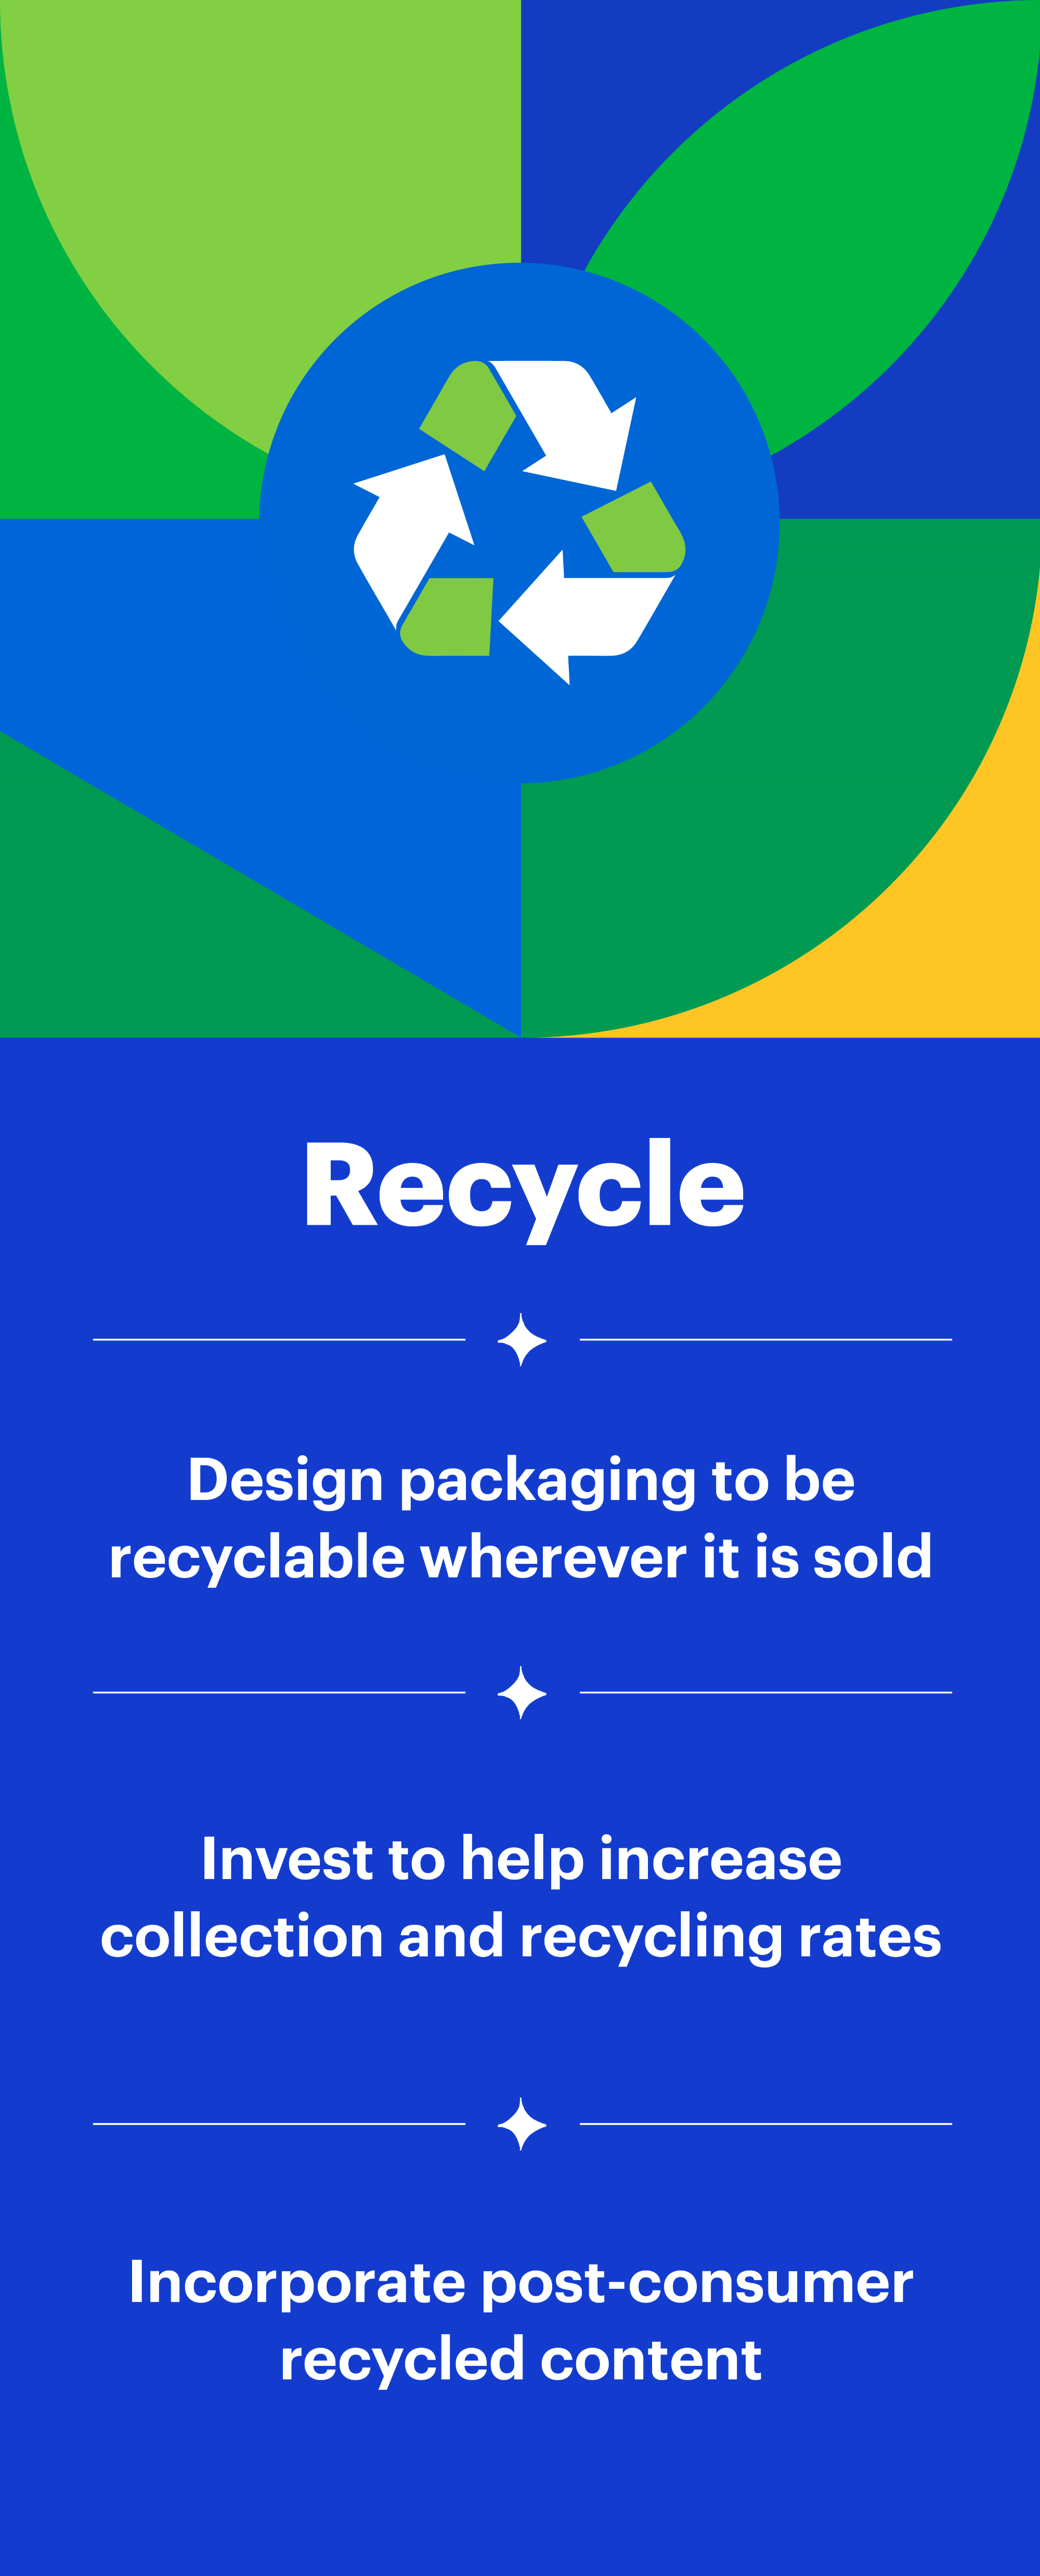 Recycle: Design packaging to be recyclable wherever it is sold. Invest to help increase collection and recycling rates. Incorporate post-consumer recycled content.